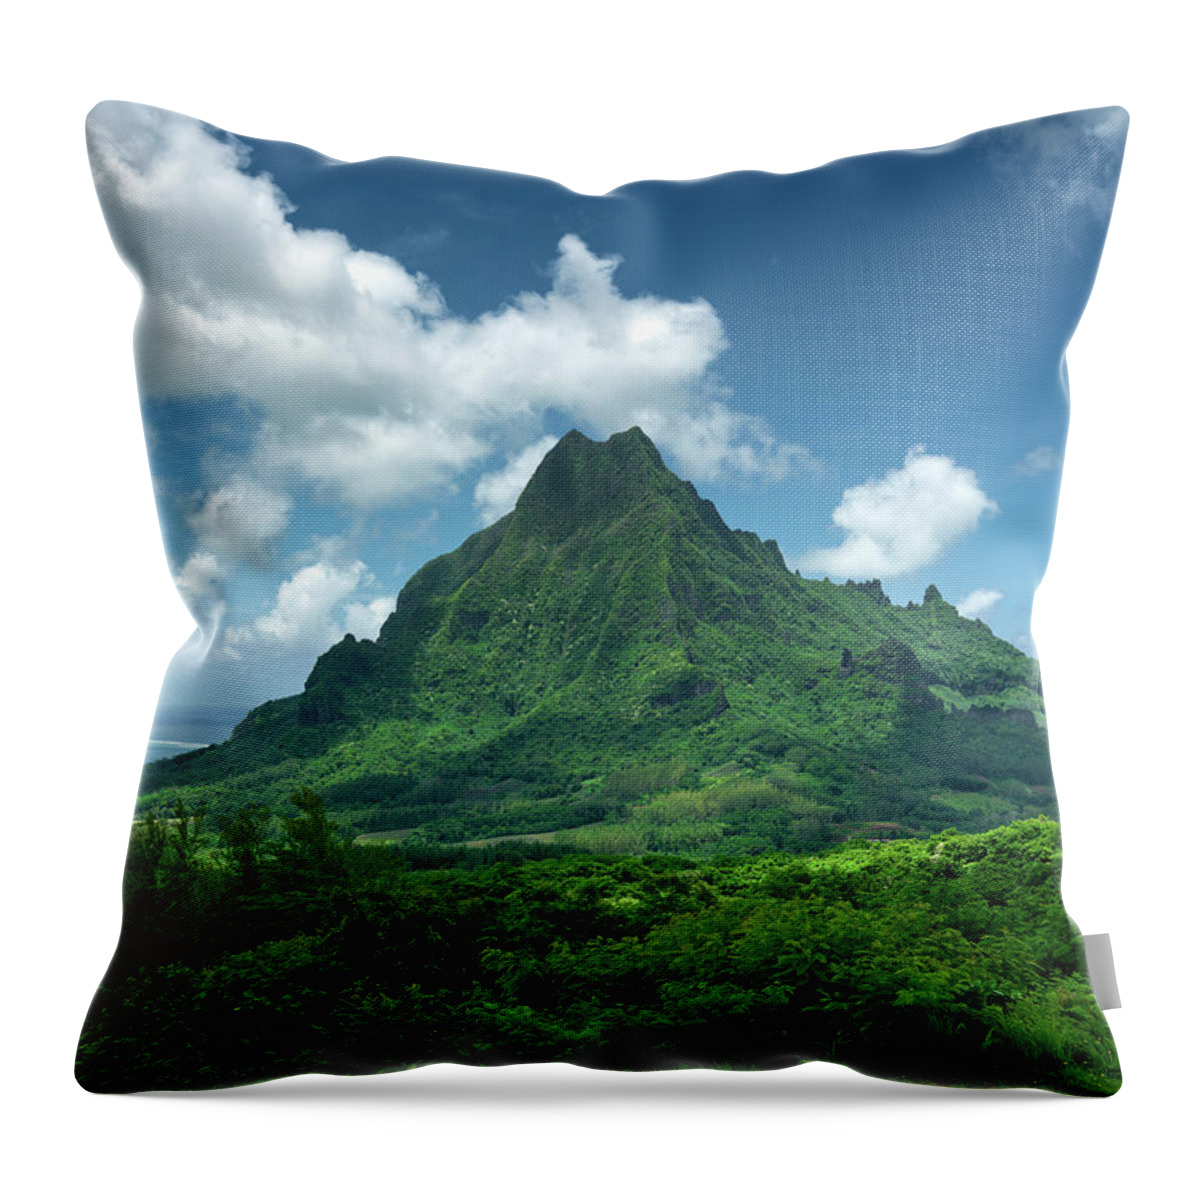 Scenics Throw Pillow featuring the photograph Moorea Island Mount Roto Nui Volcanic by Mlenny